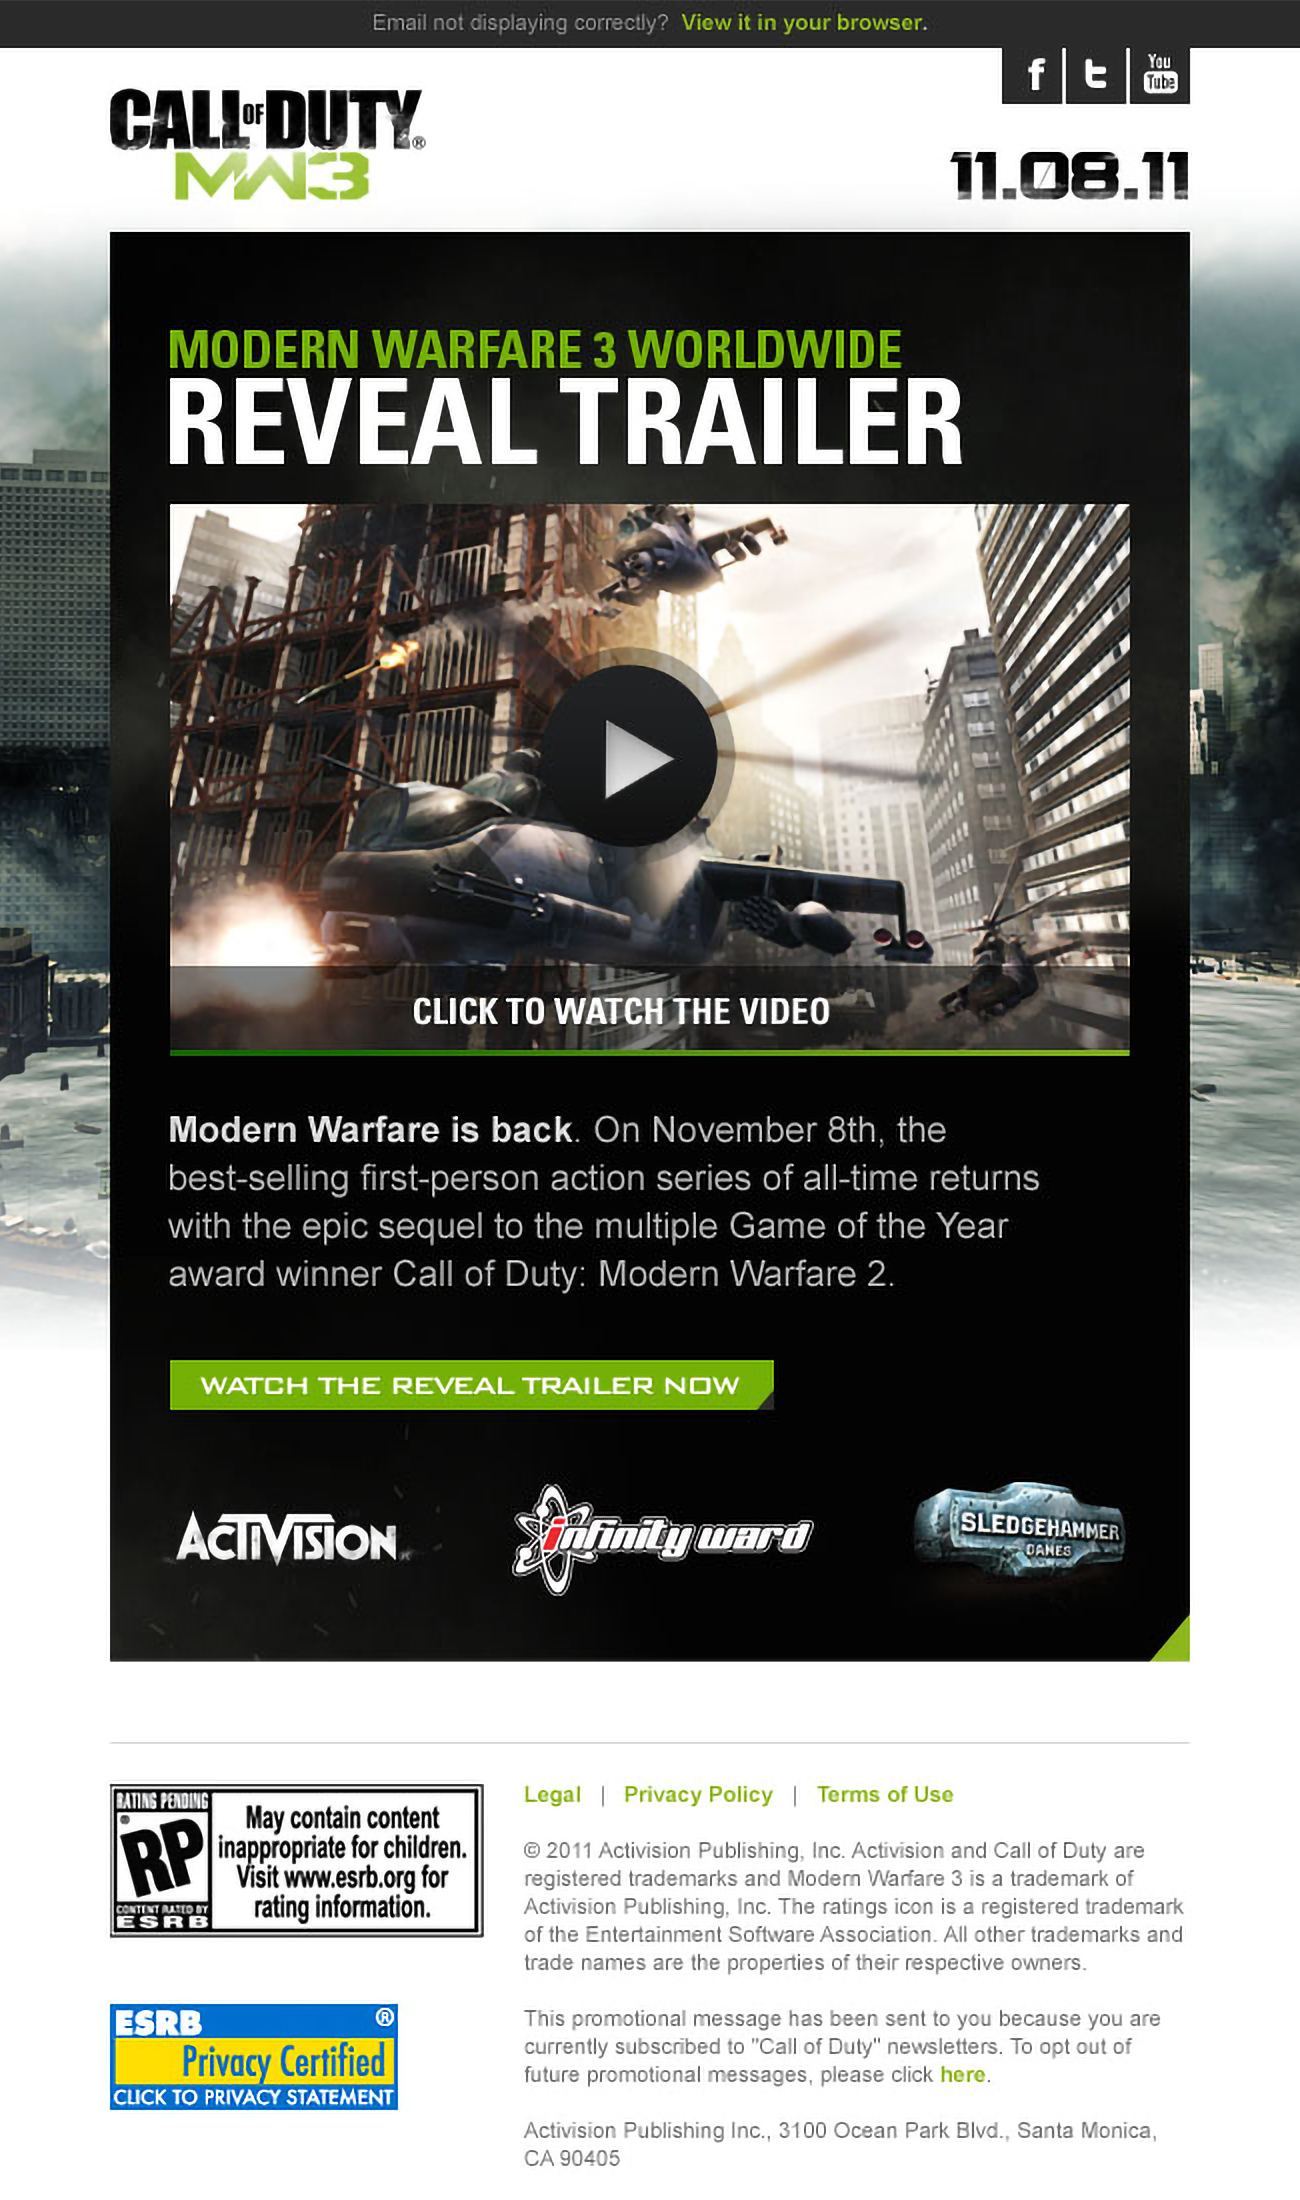 mw3-email4